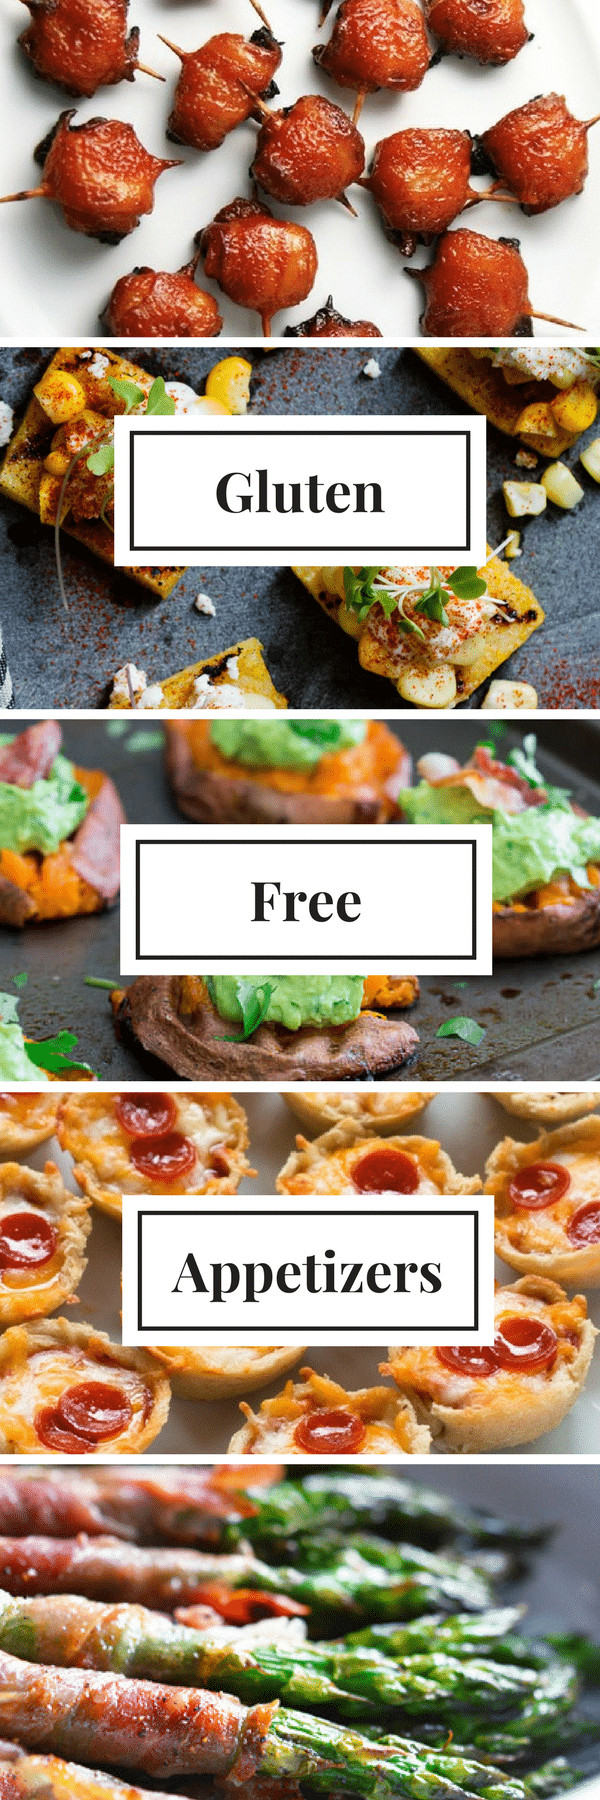 Gluten Free Appetizers
 Gluten Free Appetizers that are Perfect for Your Party